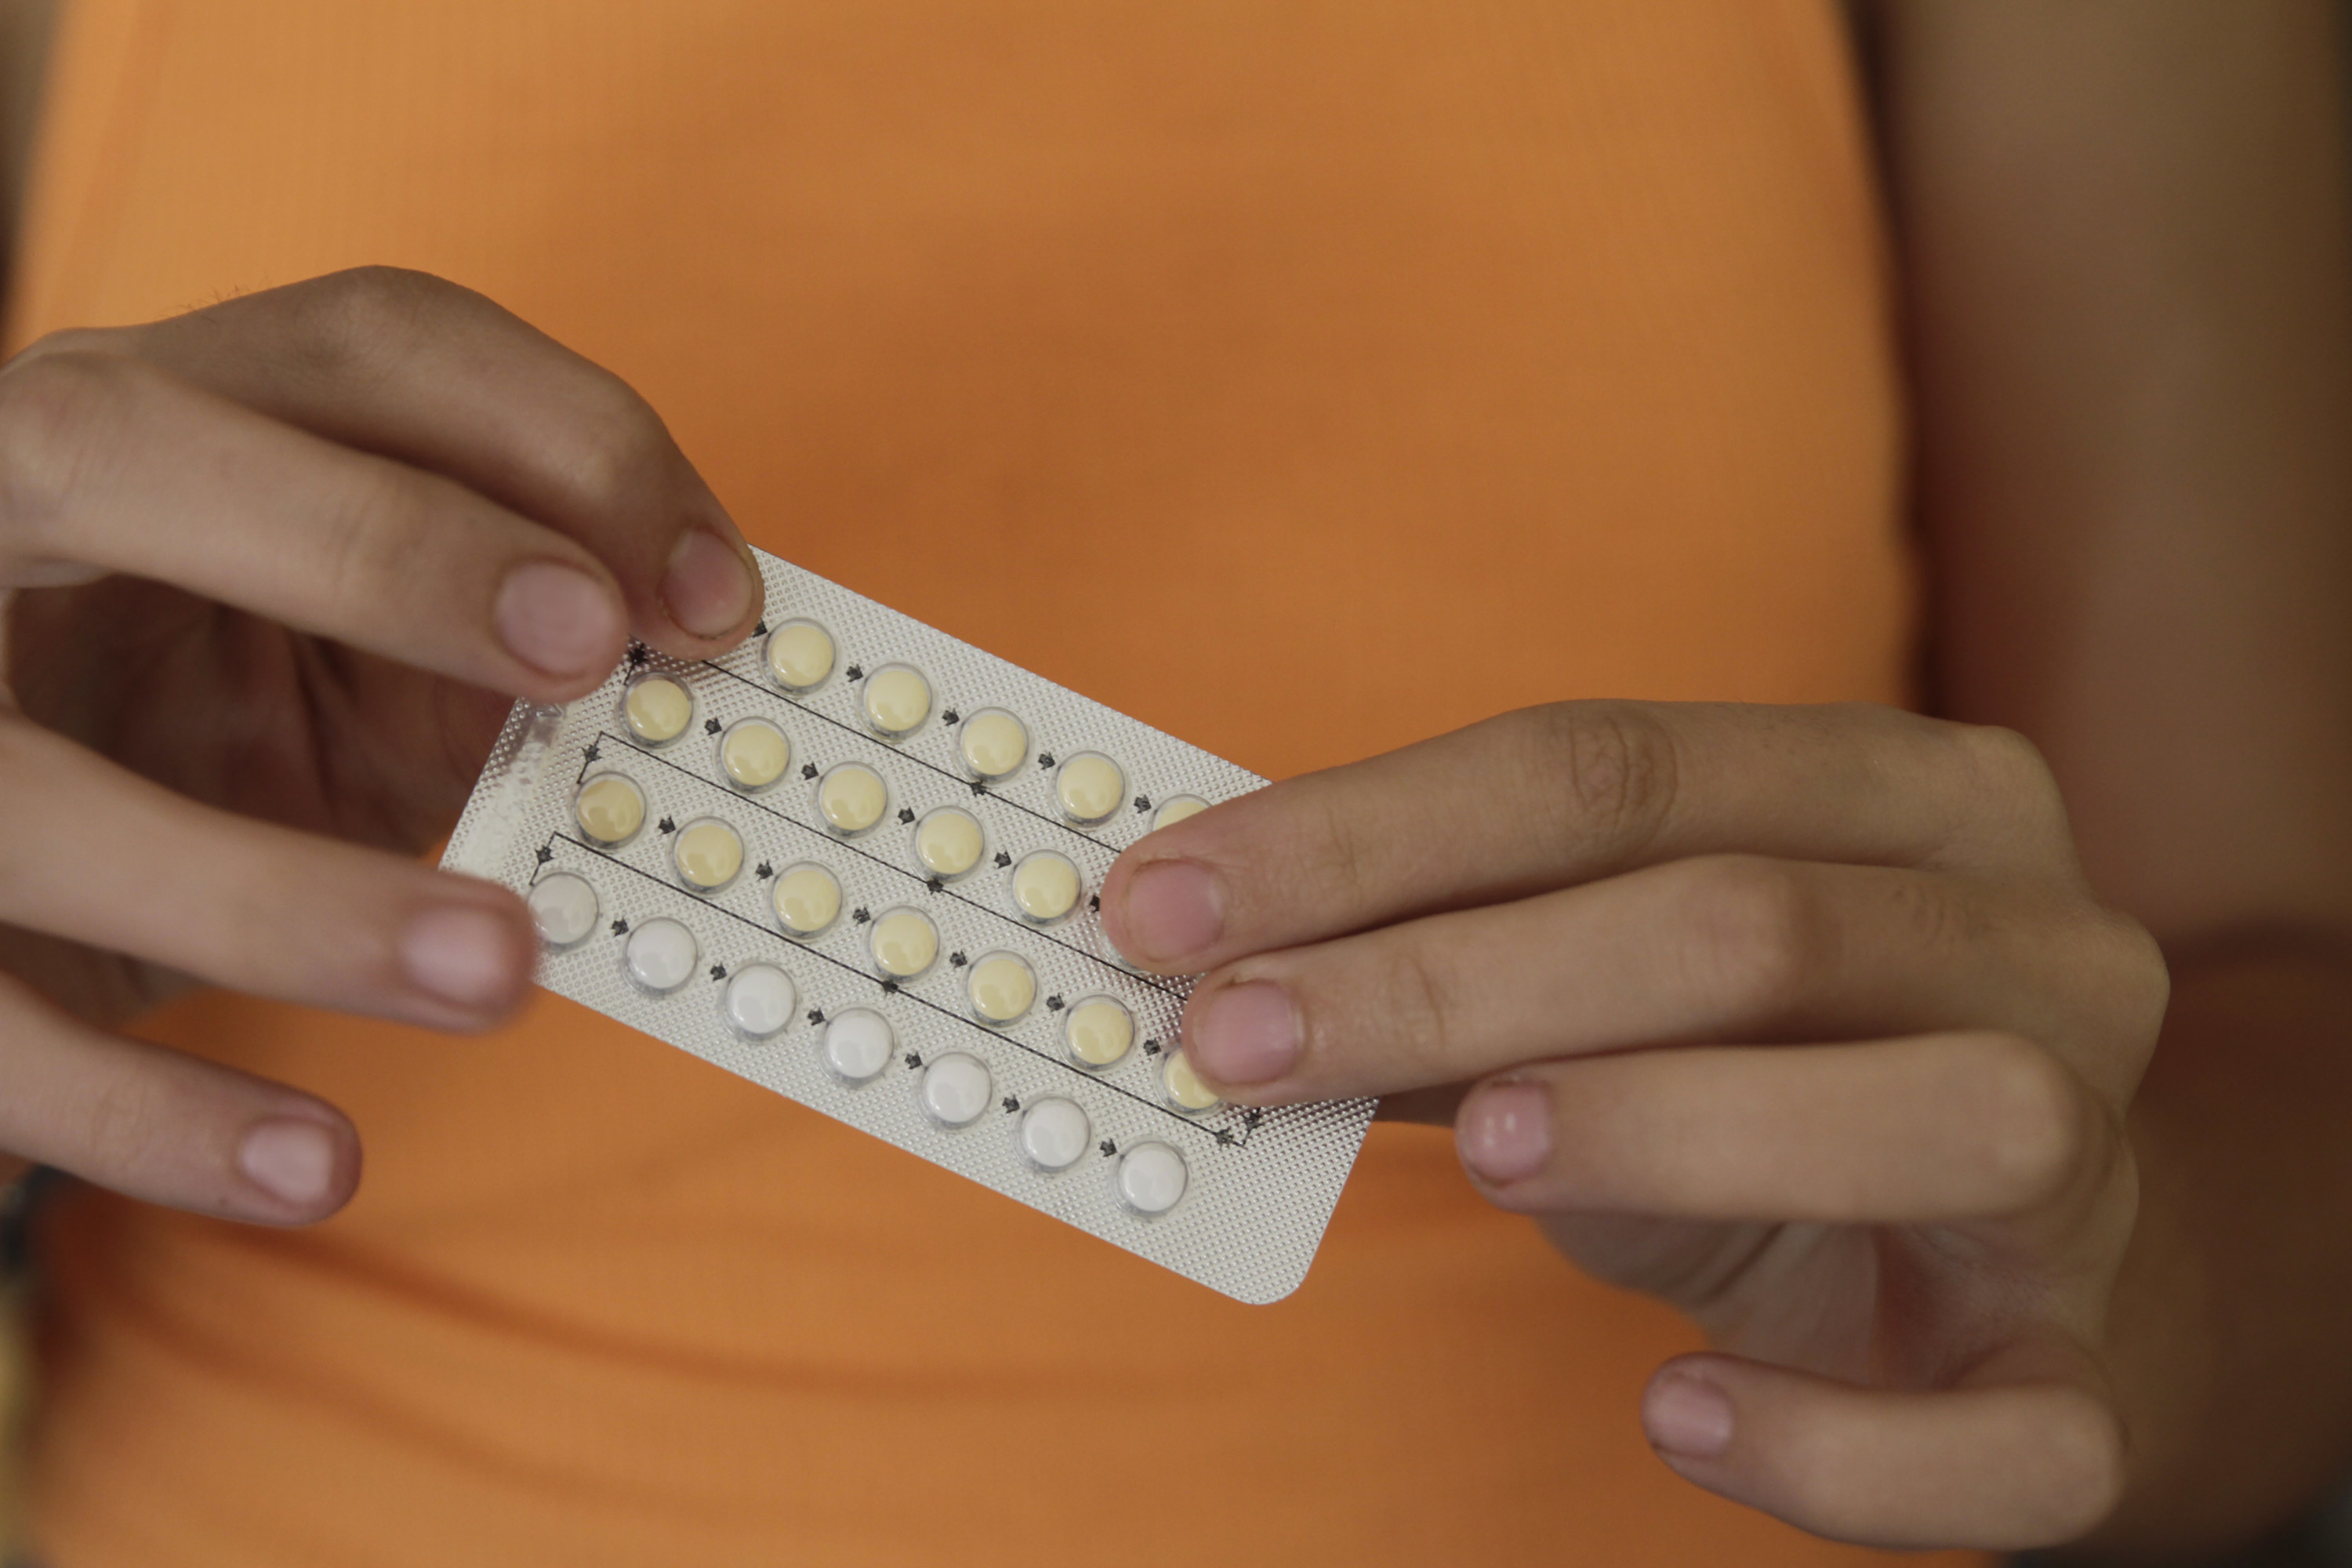 Stock image of a person holding a pack of birth control pills